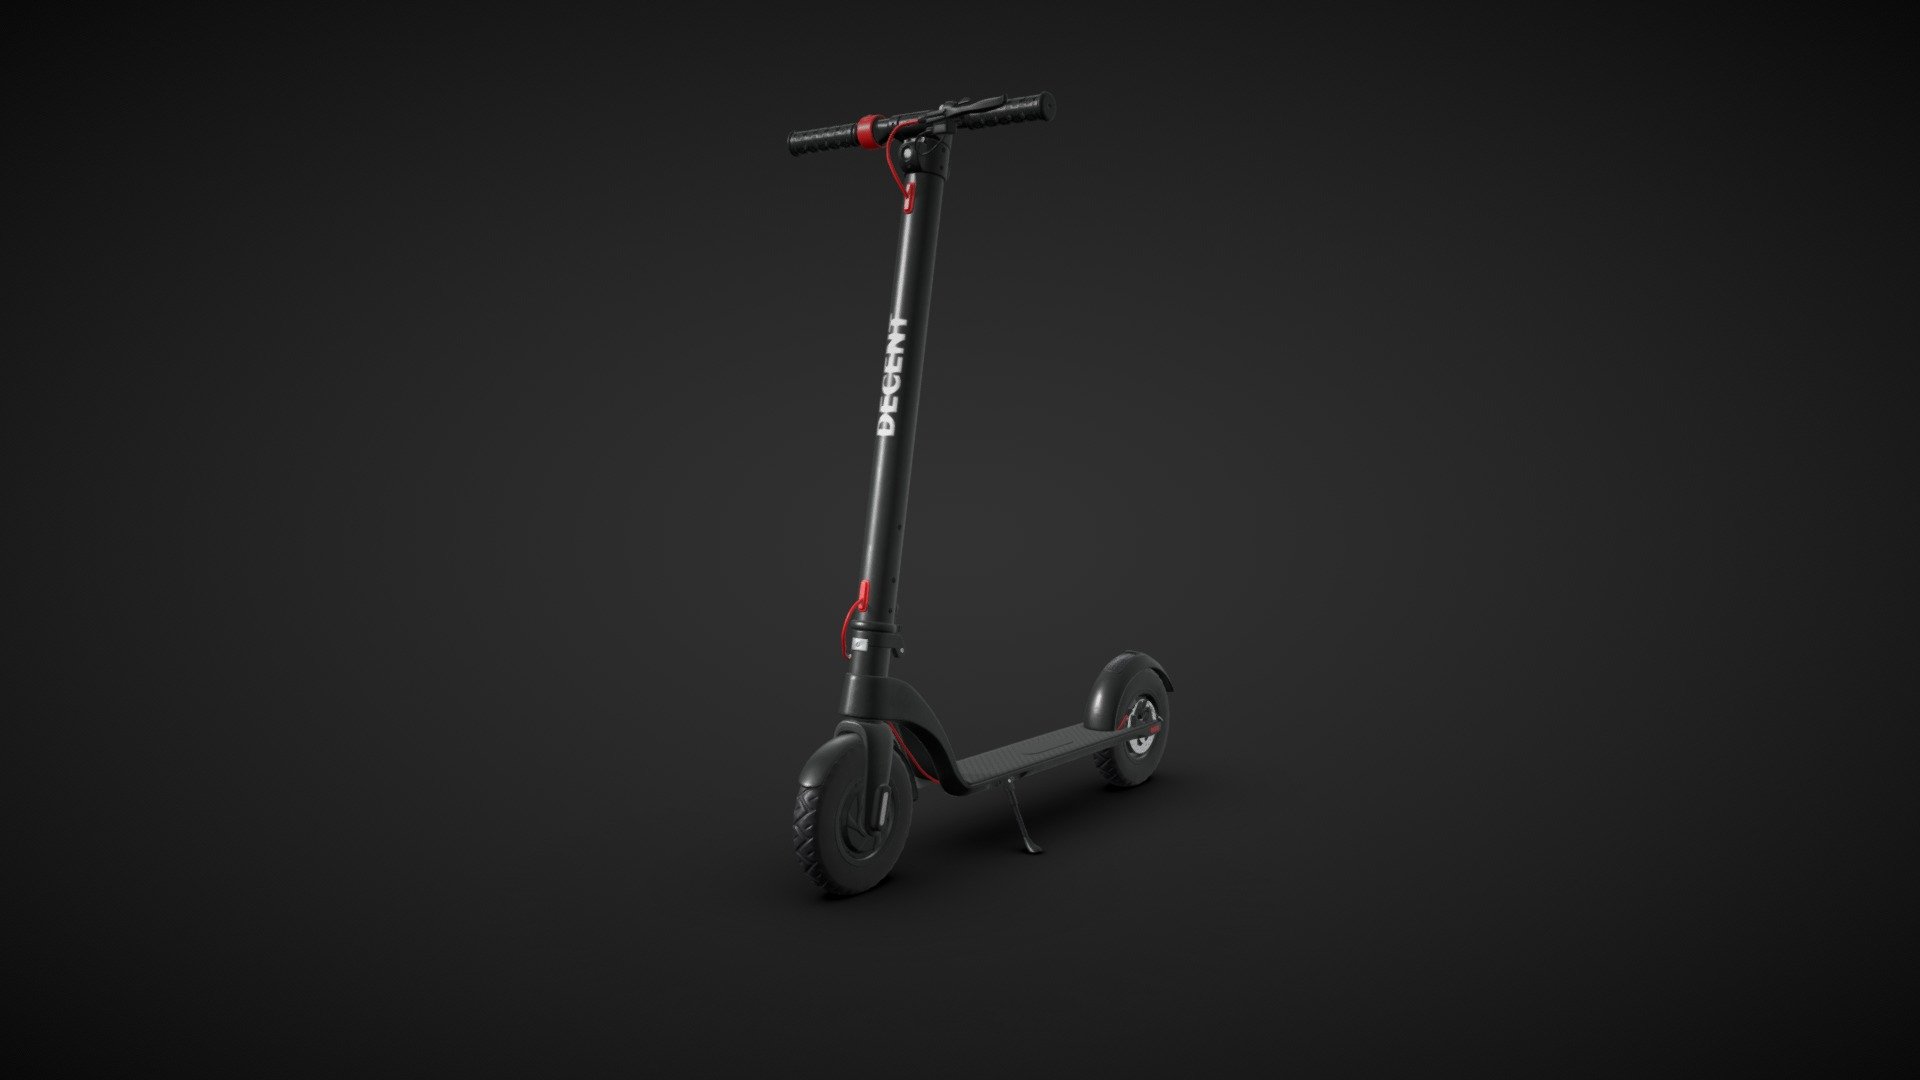 Electric Kick Scooter

Textures: : Base Color (Diffuse), Normal Map, Ambient Occlusion, Roughness, Metalness.
The resolutions of the textures are 4096x4096 and 2048x2048. 
UVW Mapped: Yes
Materials: Yes - Electric Kick Scooter - 3D model by Agha.Najam 3d model